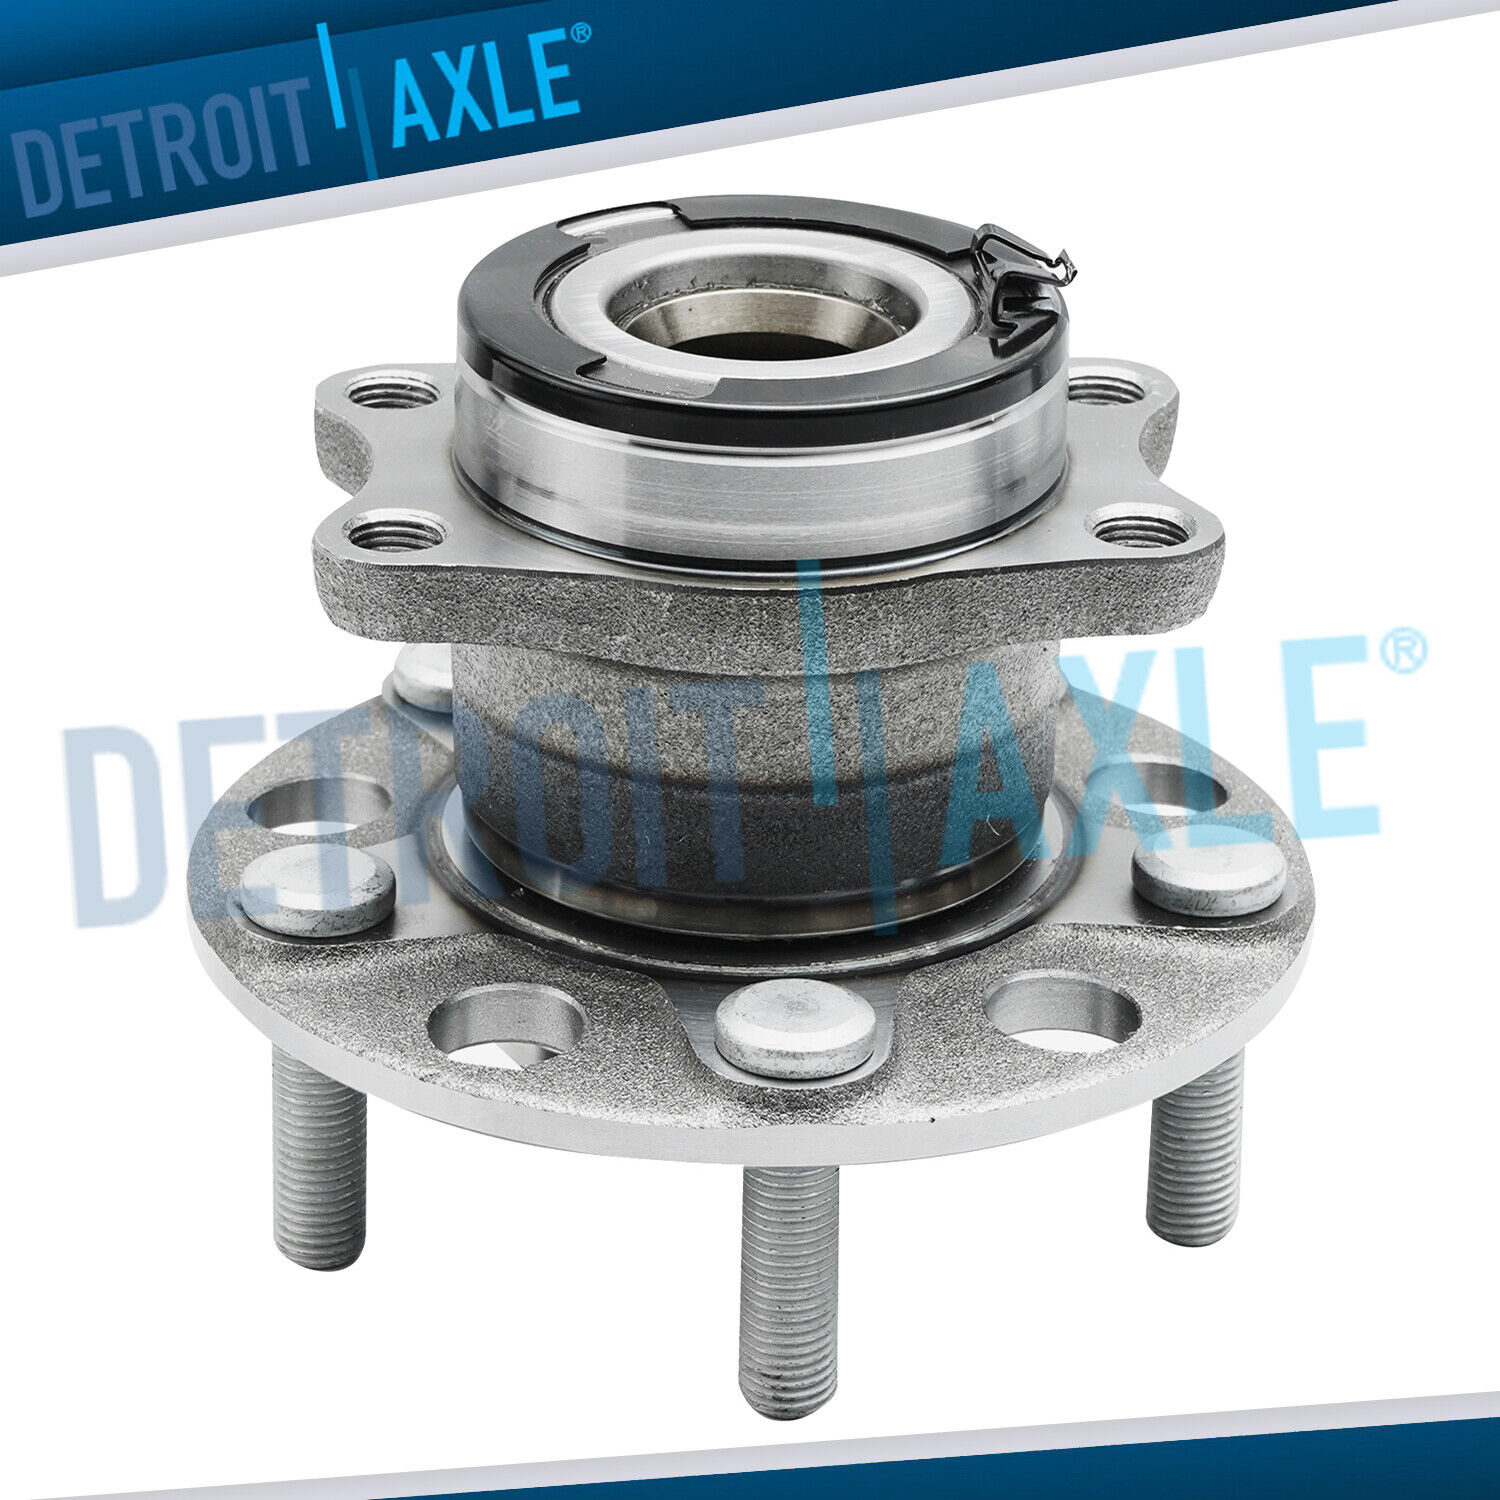 4WD REAR Wheel Hub and Bearing Assembly for Dodge Caliber Jeep Compass Patriot